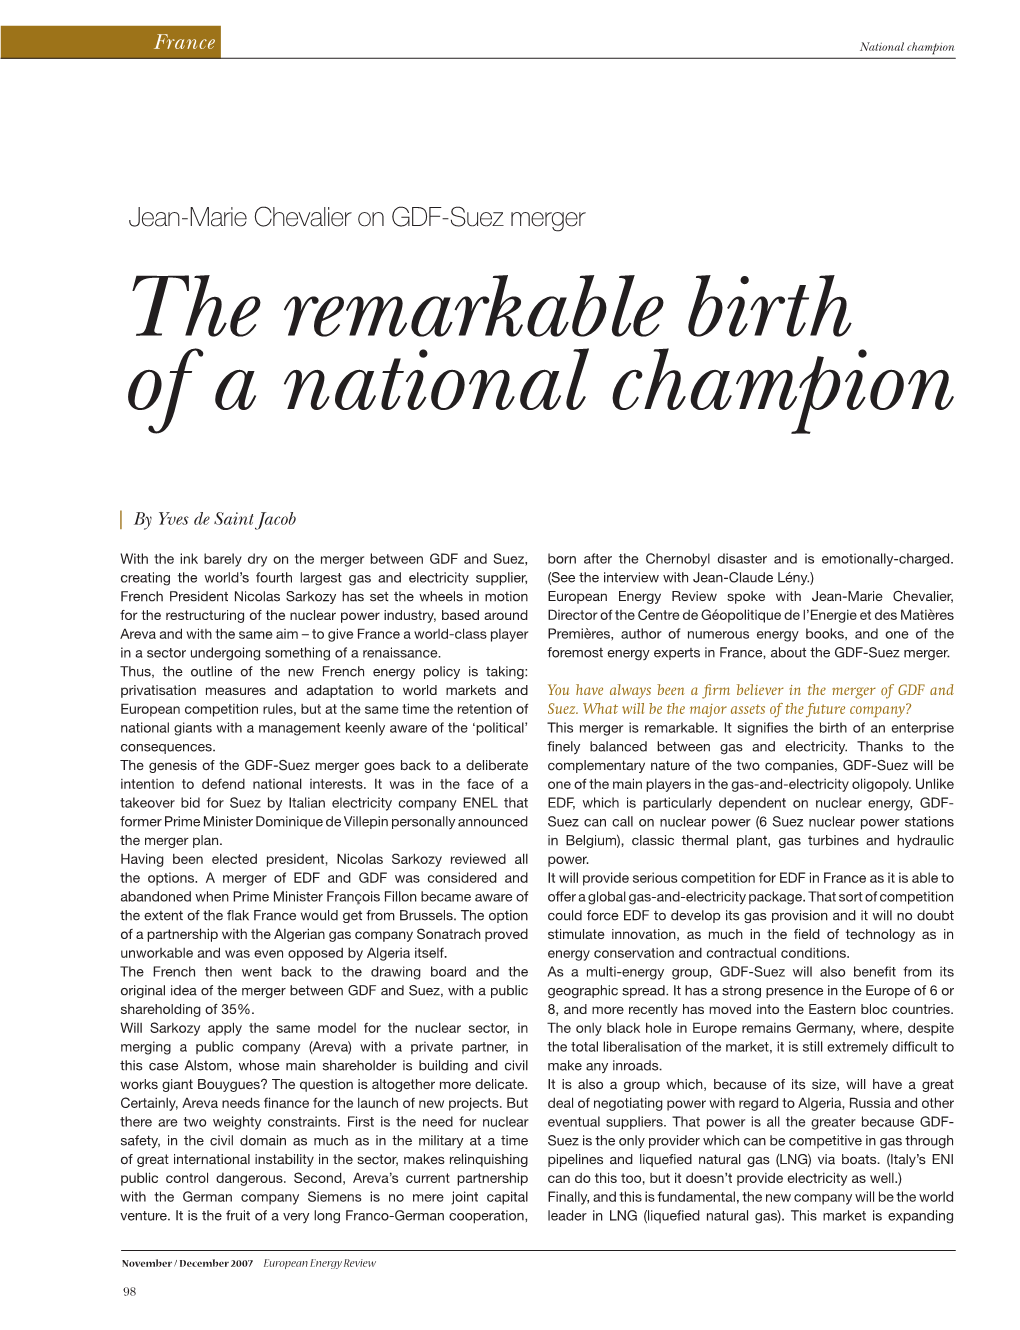 The Remarkable Birth of a National Champion